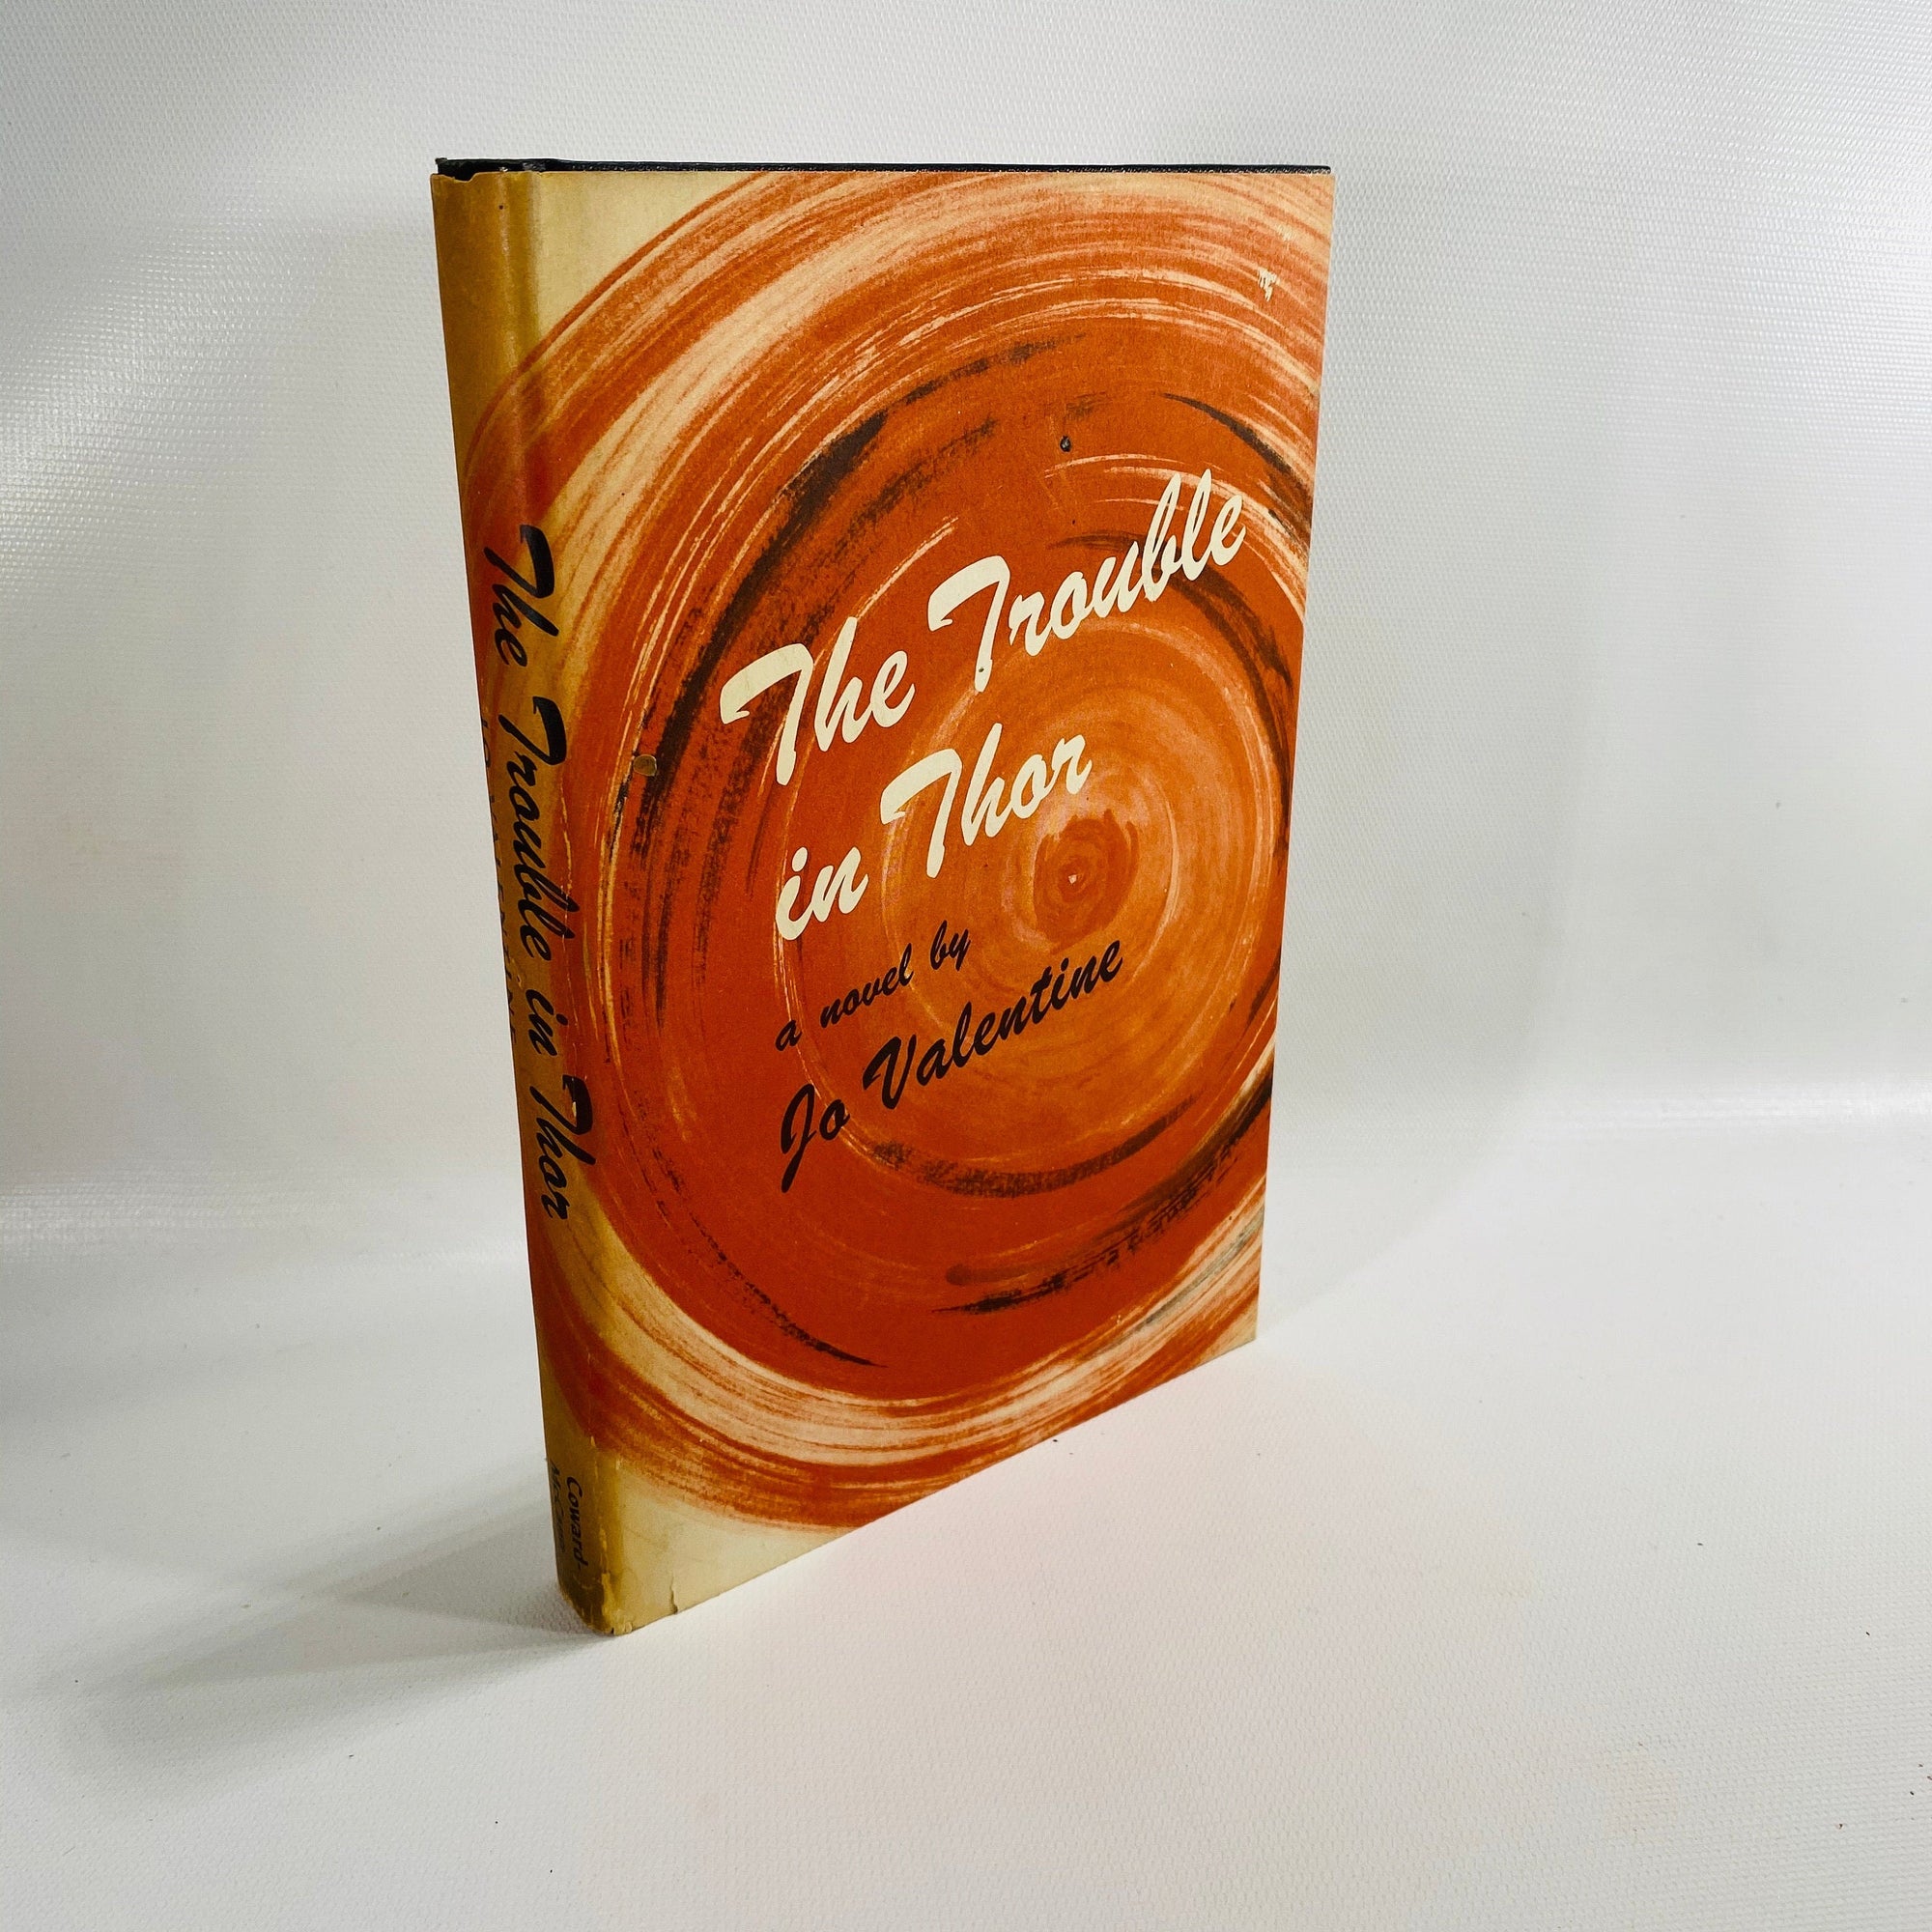 The Trouble with Thor by Jo Valentine 1953 Vintage Book